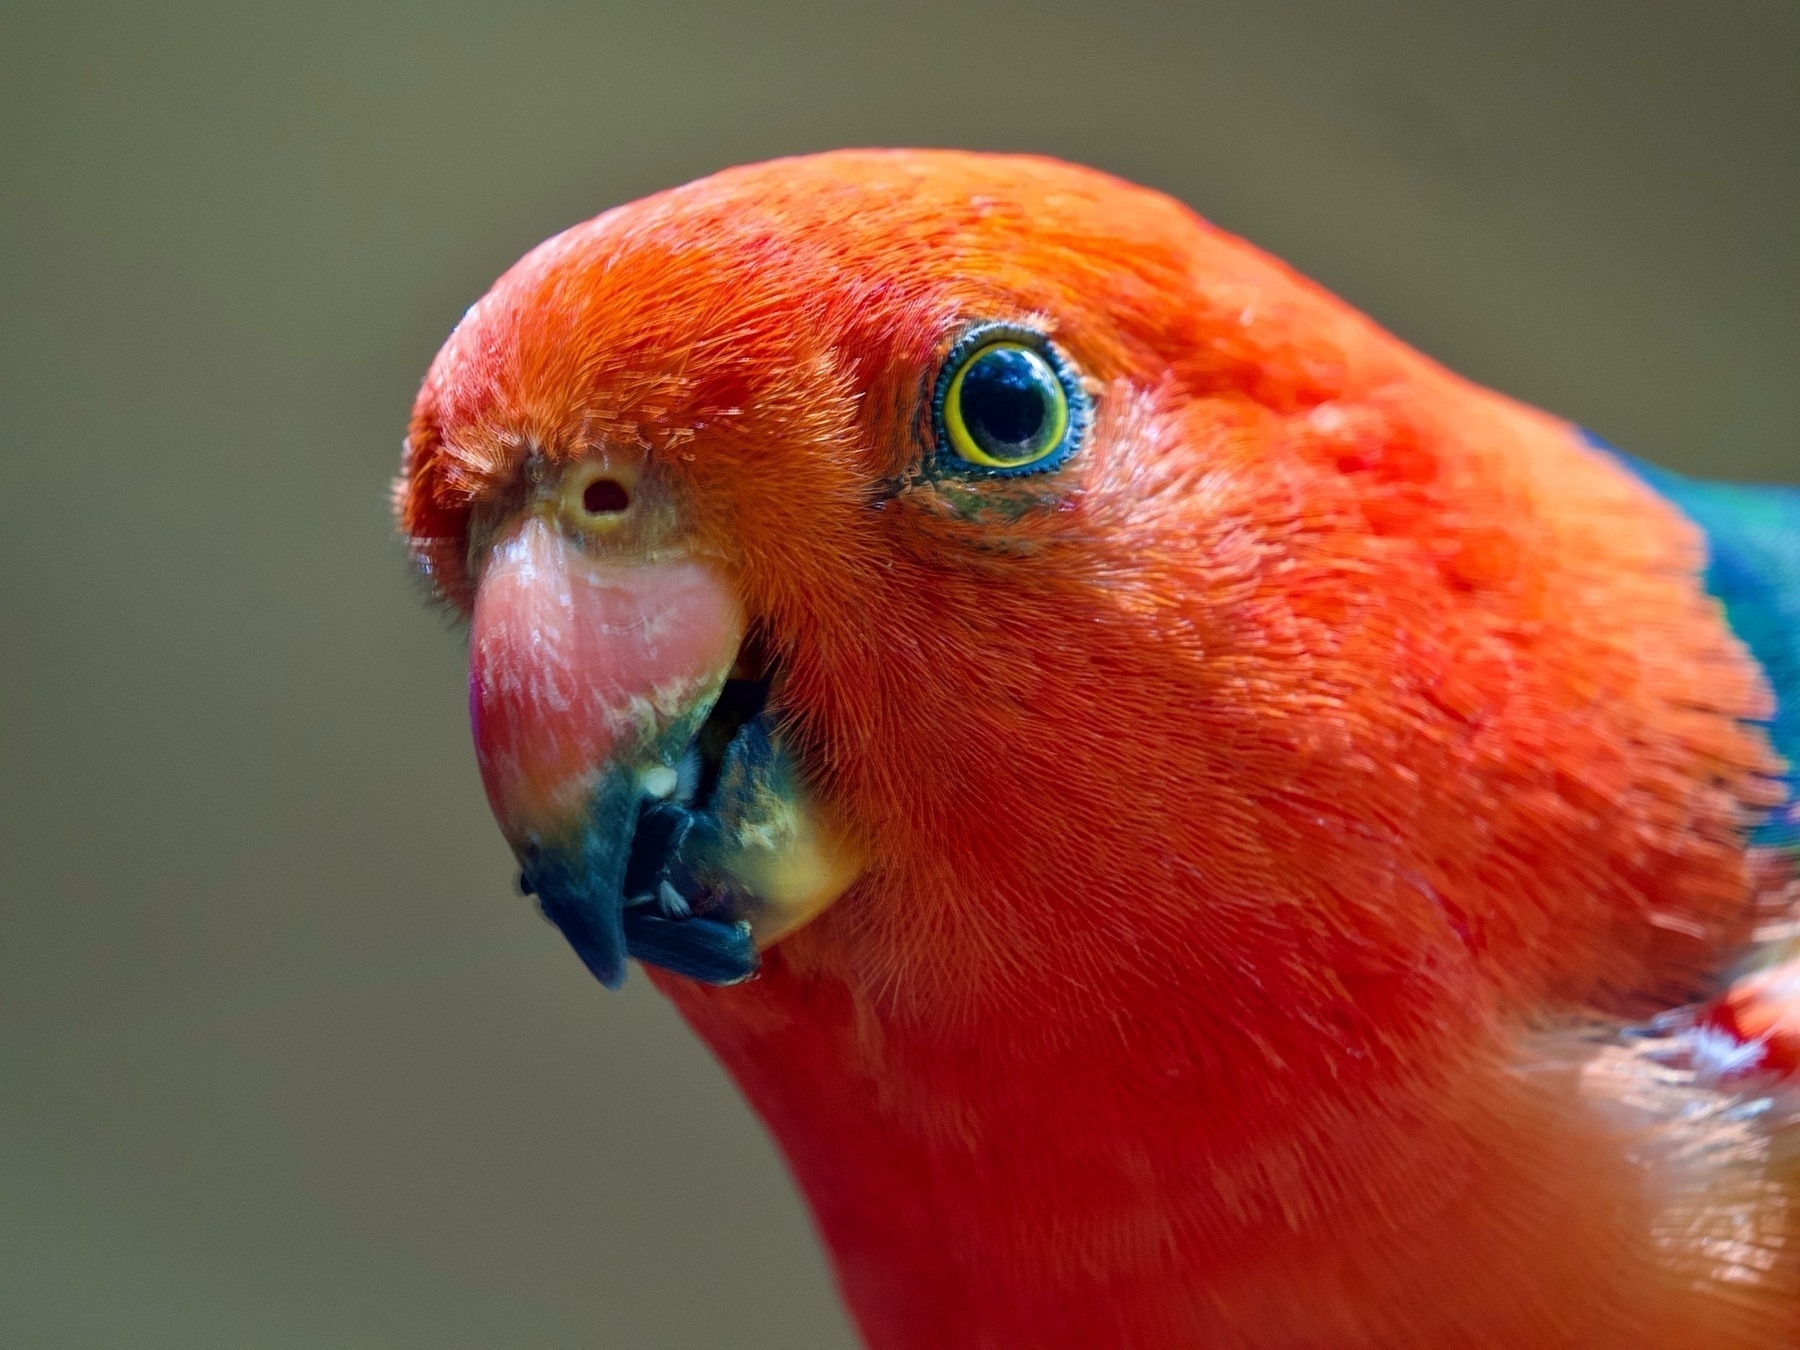 A close-up of Stumpy the King Parrot